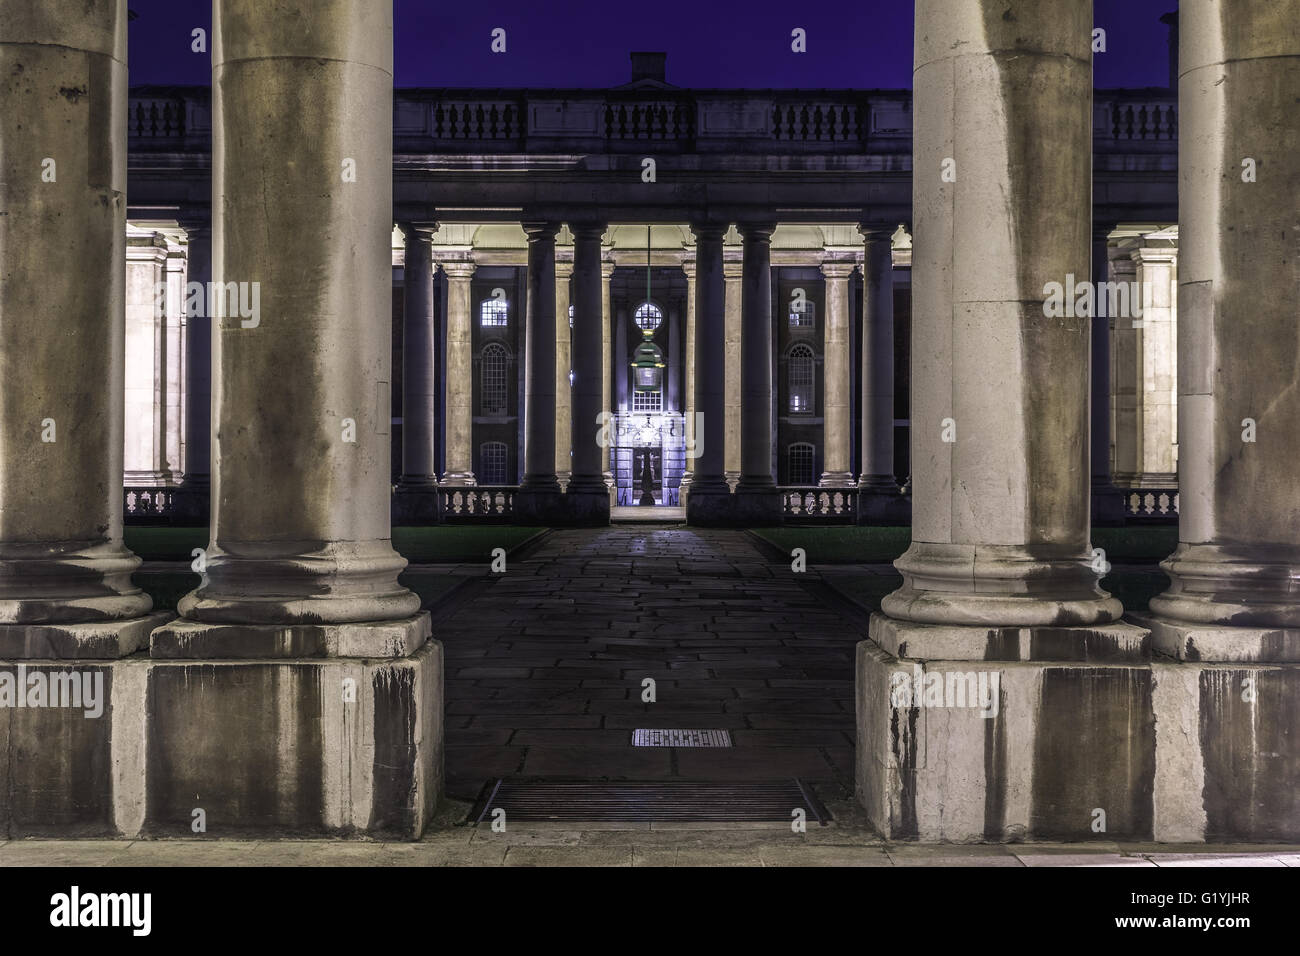 University of Greenwich in London at night Stock Photo